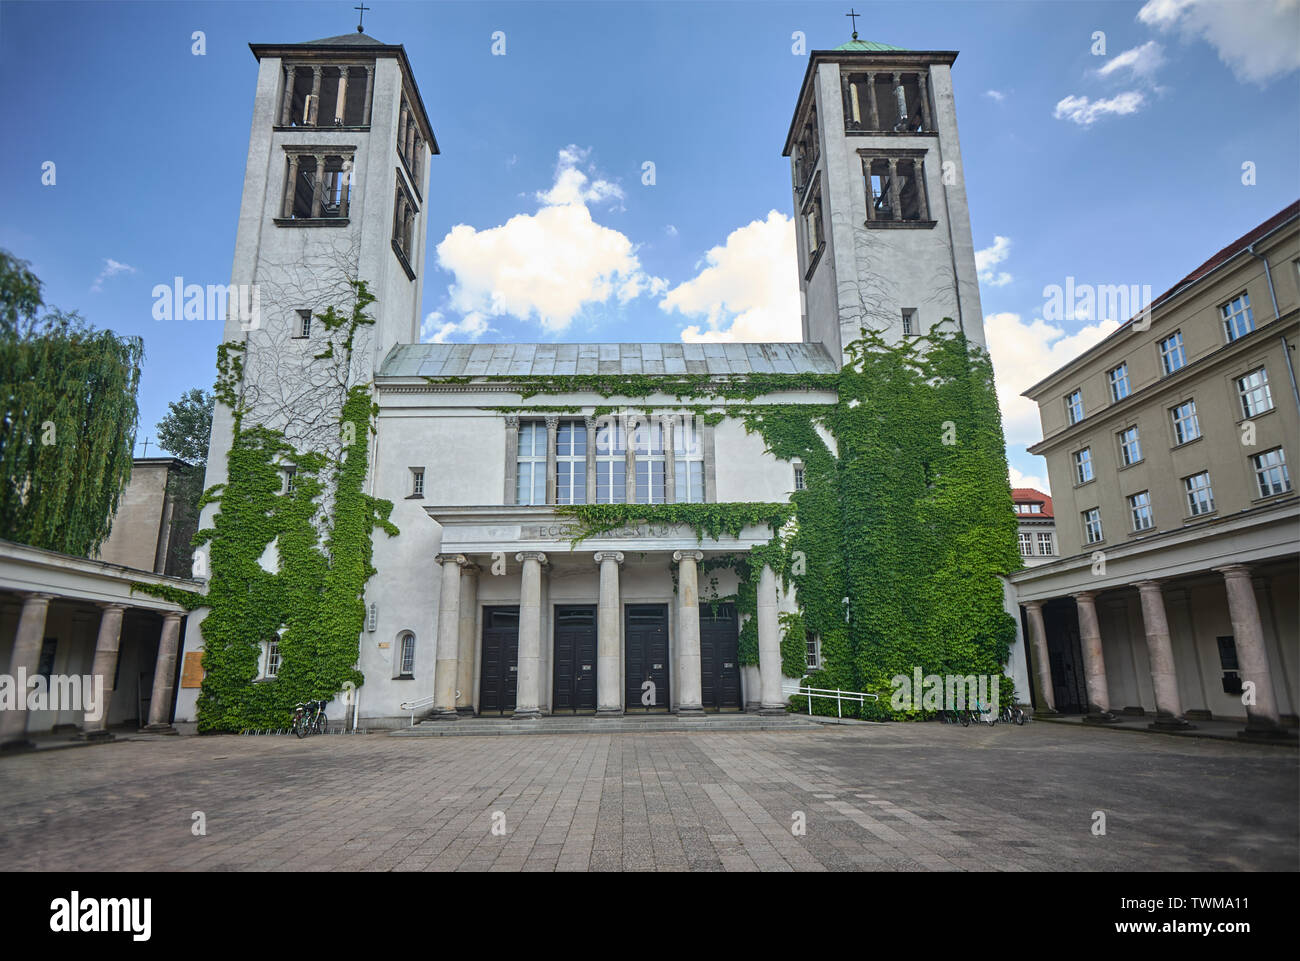 Eclectic facade of the Catholic temple with two towers in Poznan Stock Photo